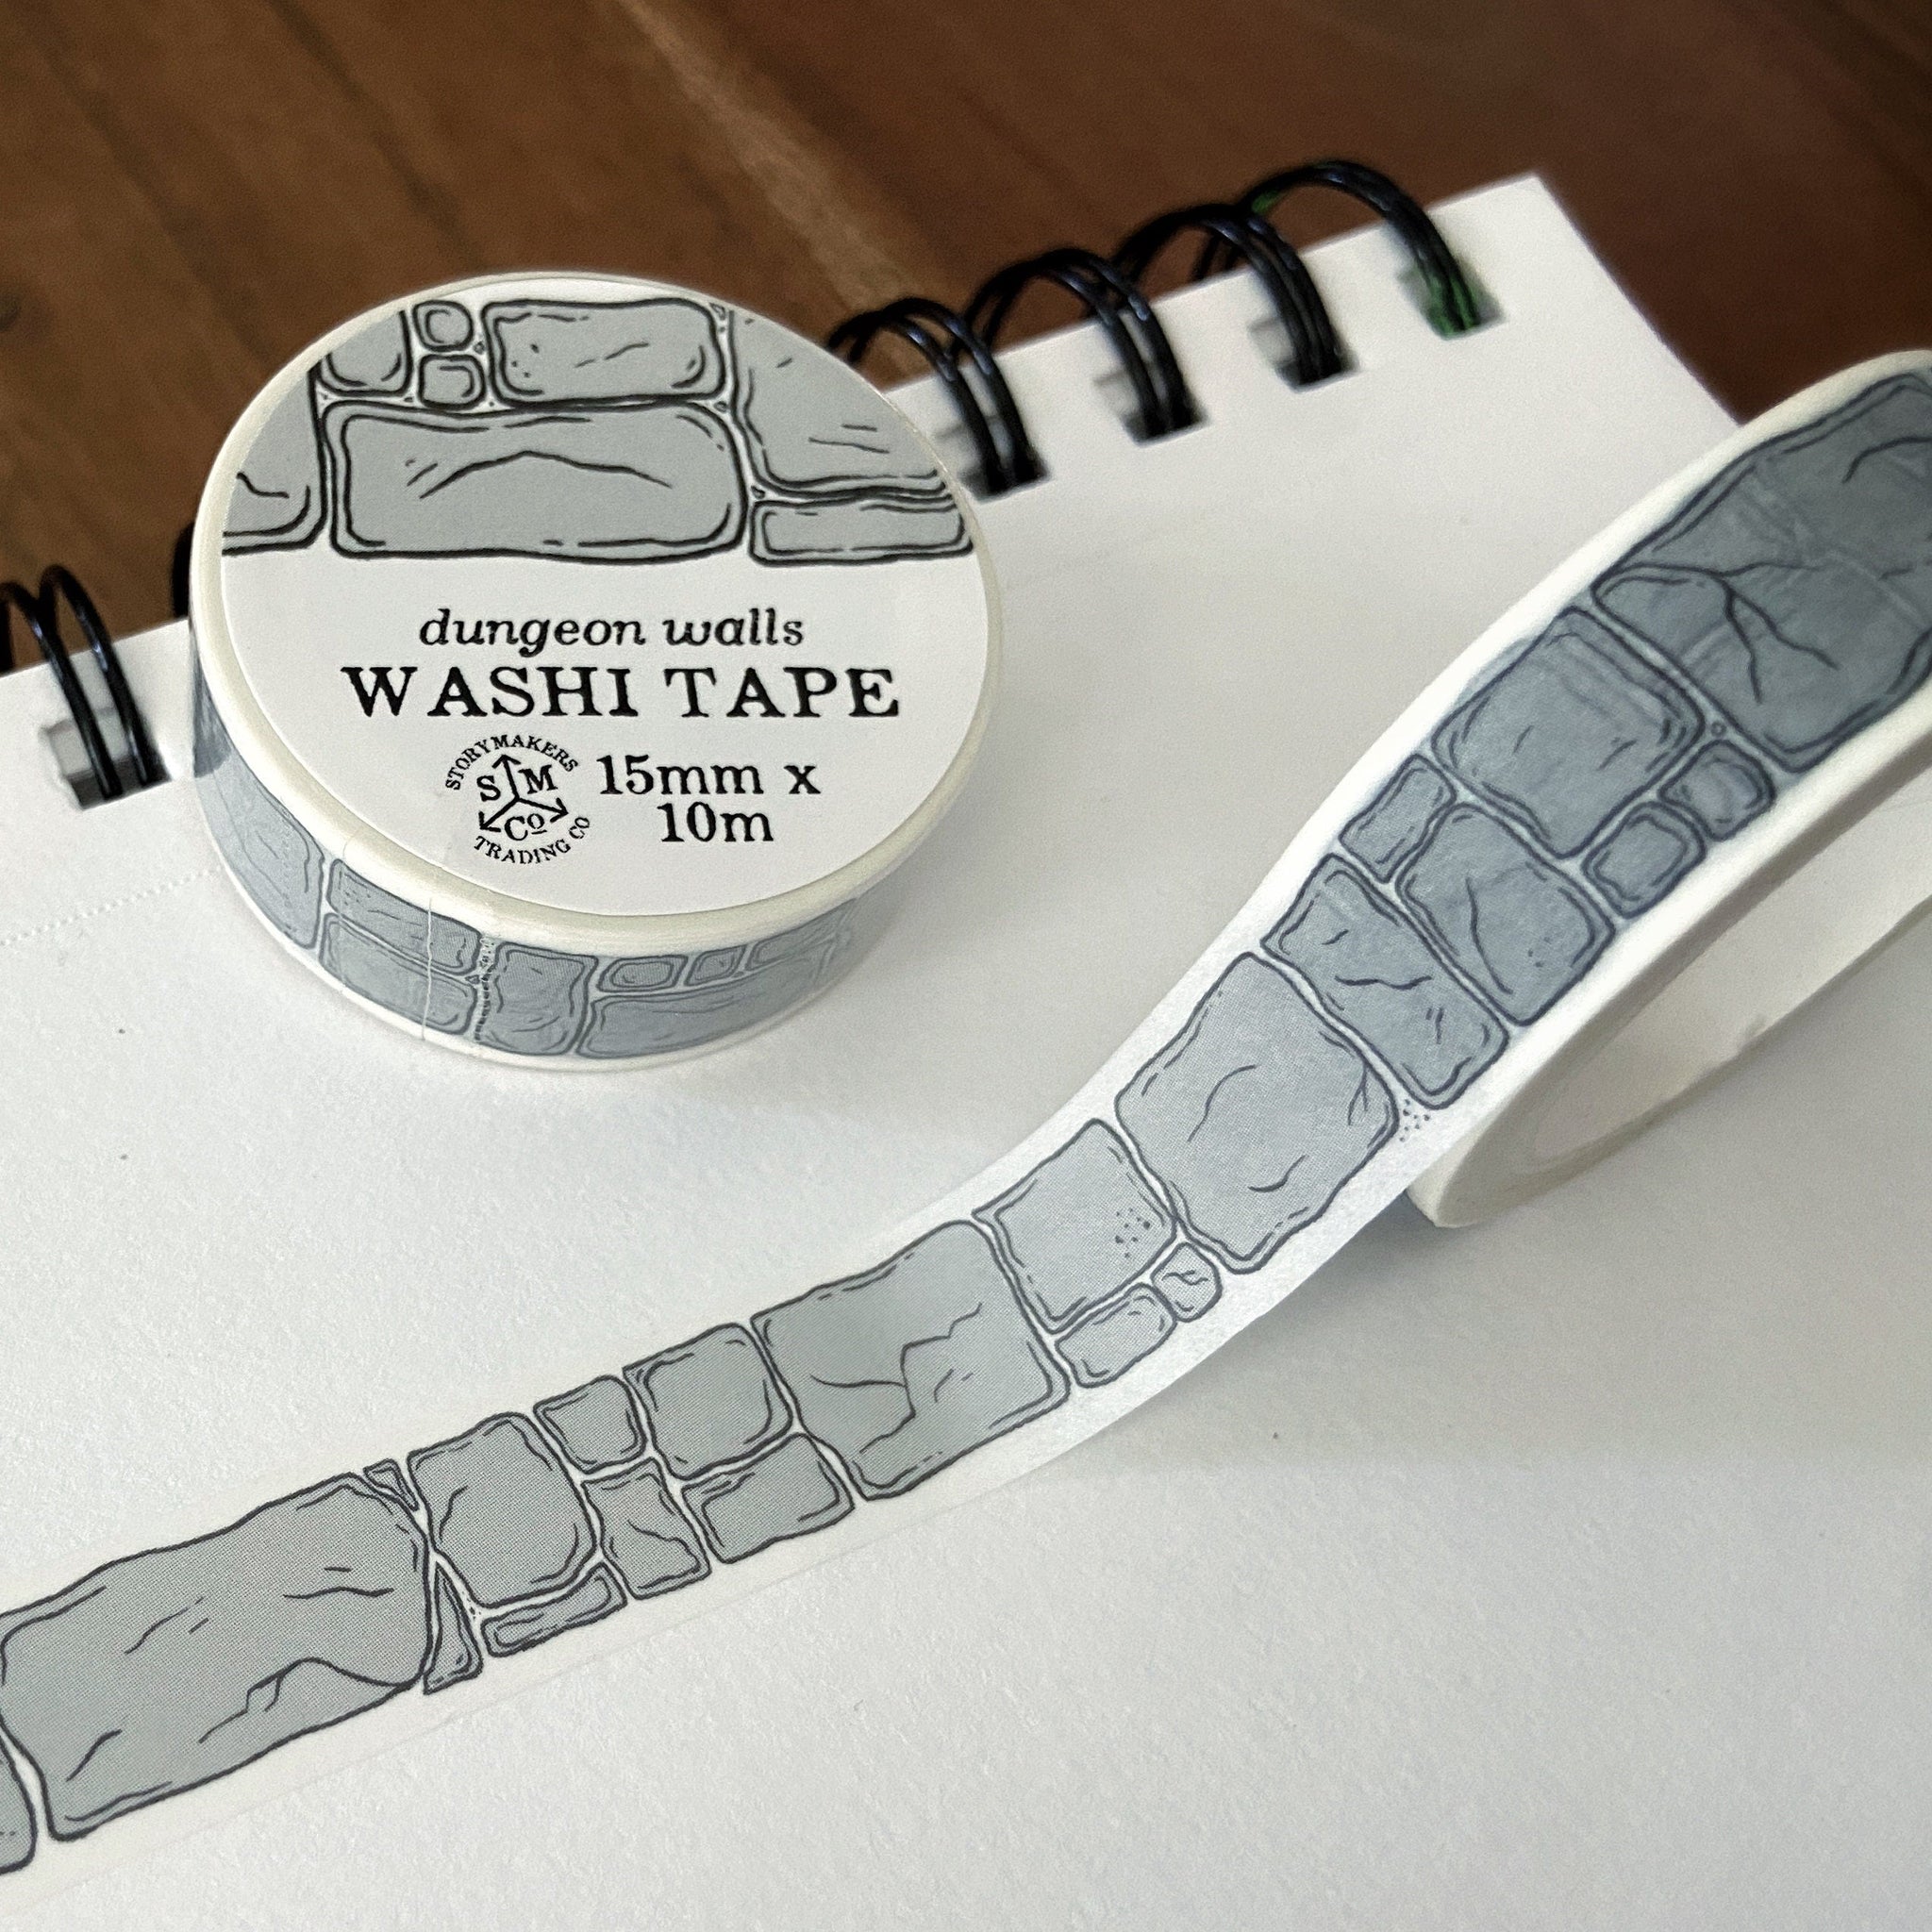 Stone Dungeon Walls Washi Tape - Instant Dungeon Creator - for world builders, RPG, D&D, fantasy lovers and more!